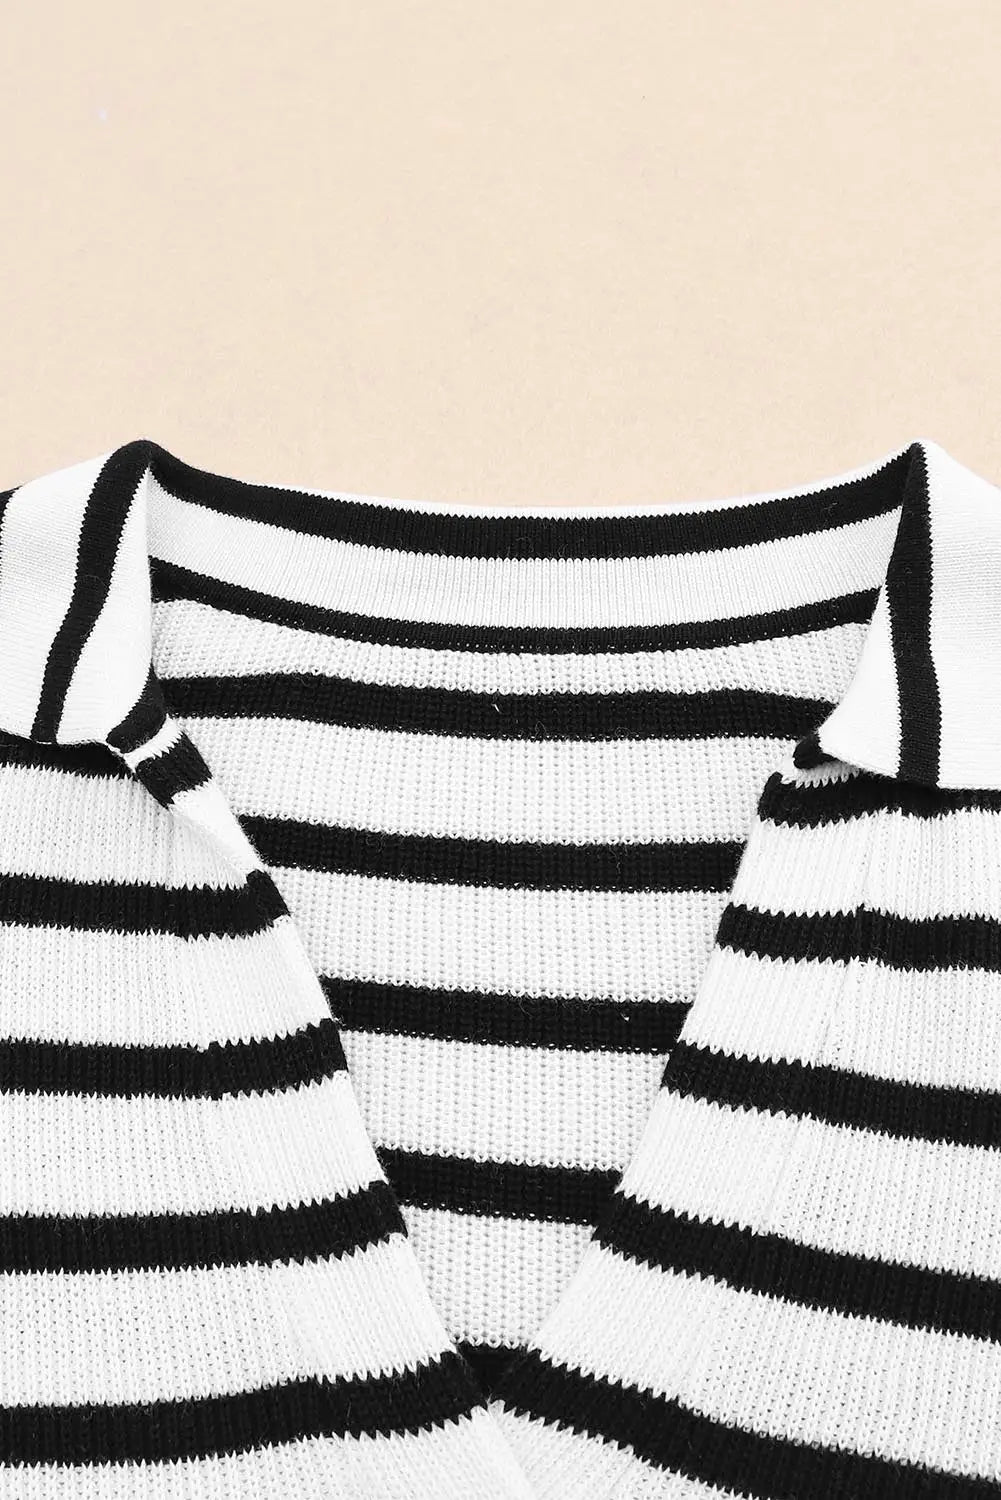 Stripe collared v neck lightweight knit casual sweater - sweaters & cardigans